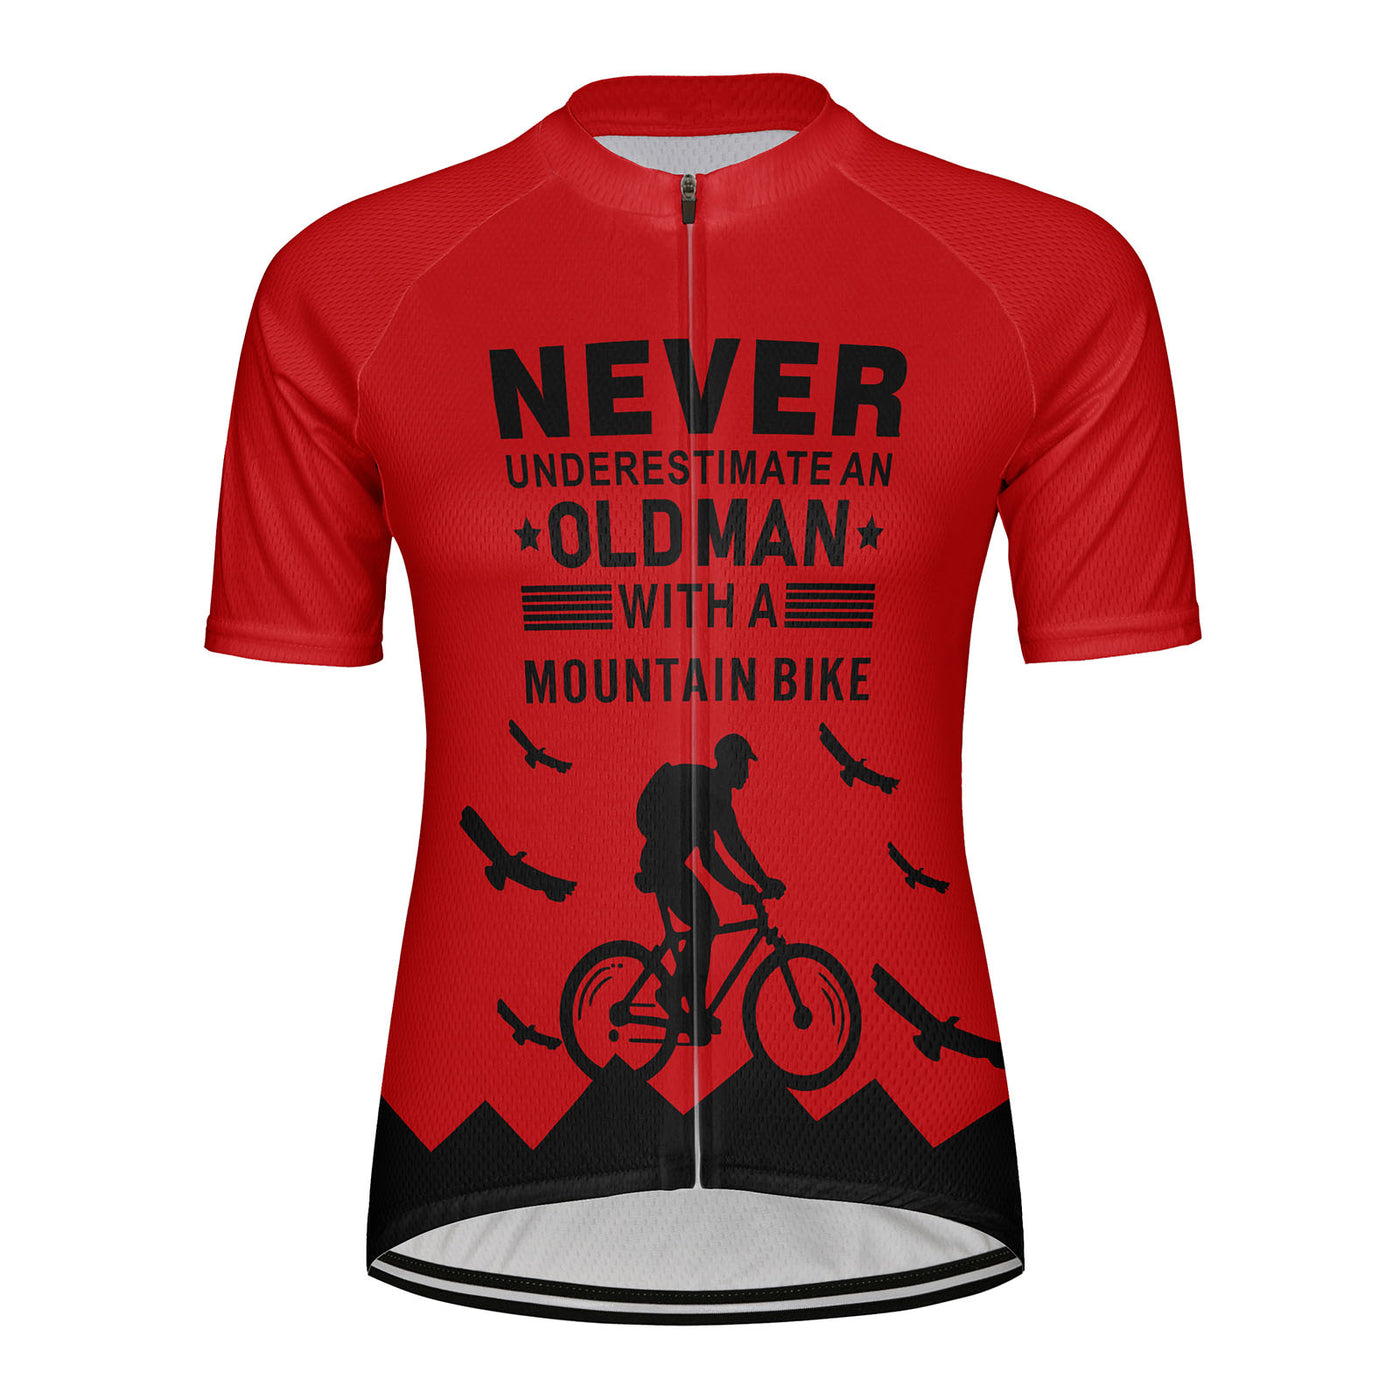 Customized Old Man with A Mountain Bike Women's Cycling Jersey Short Sleeve